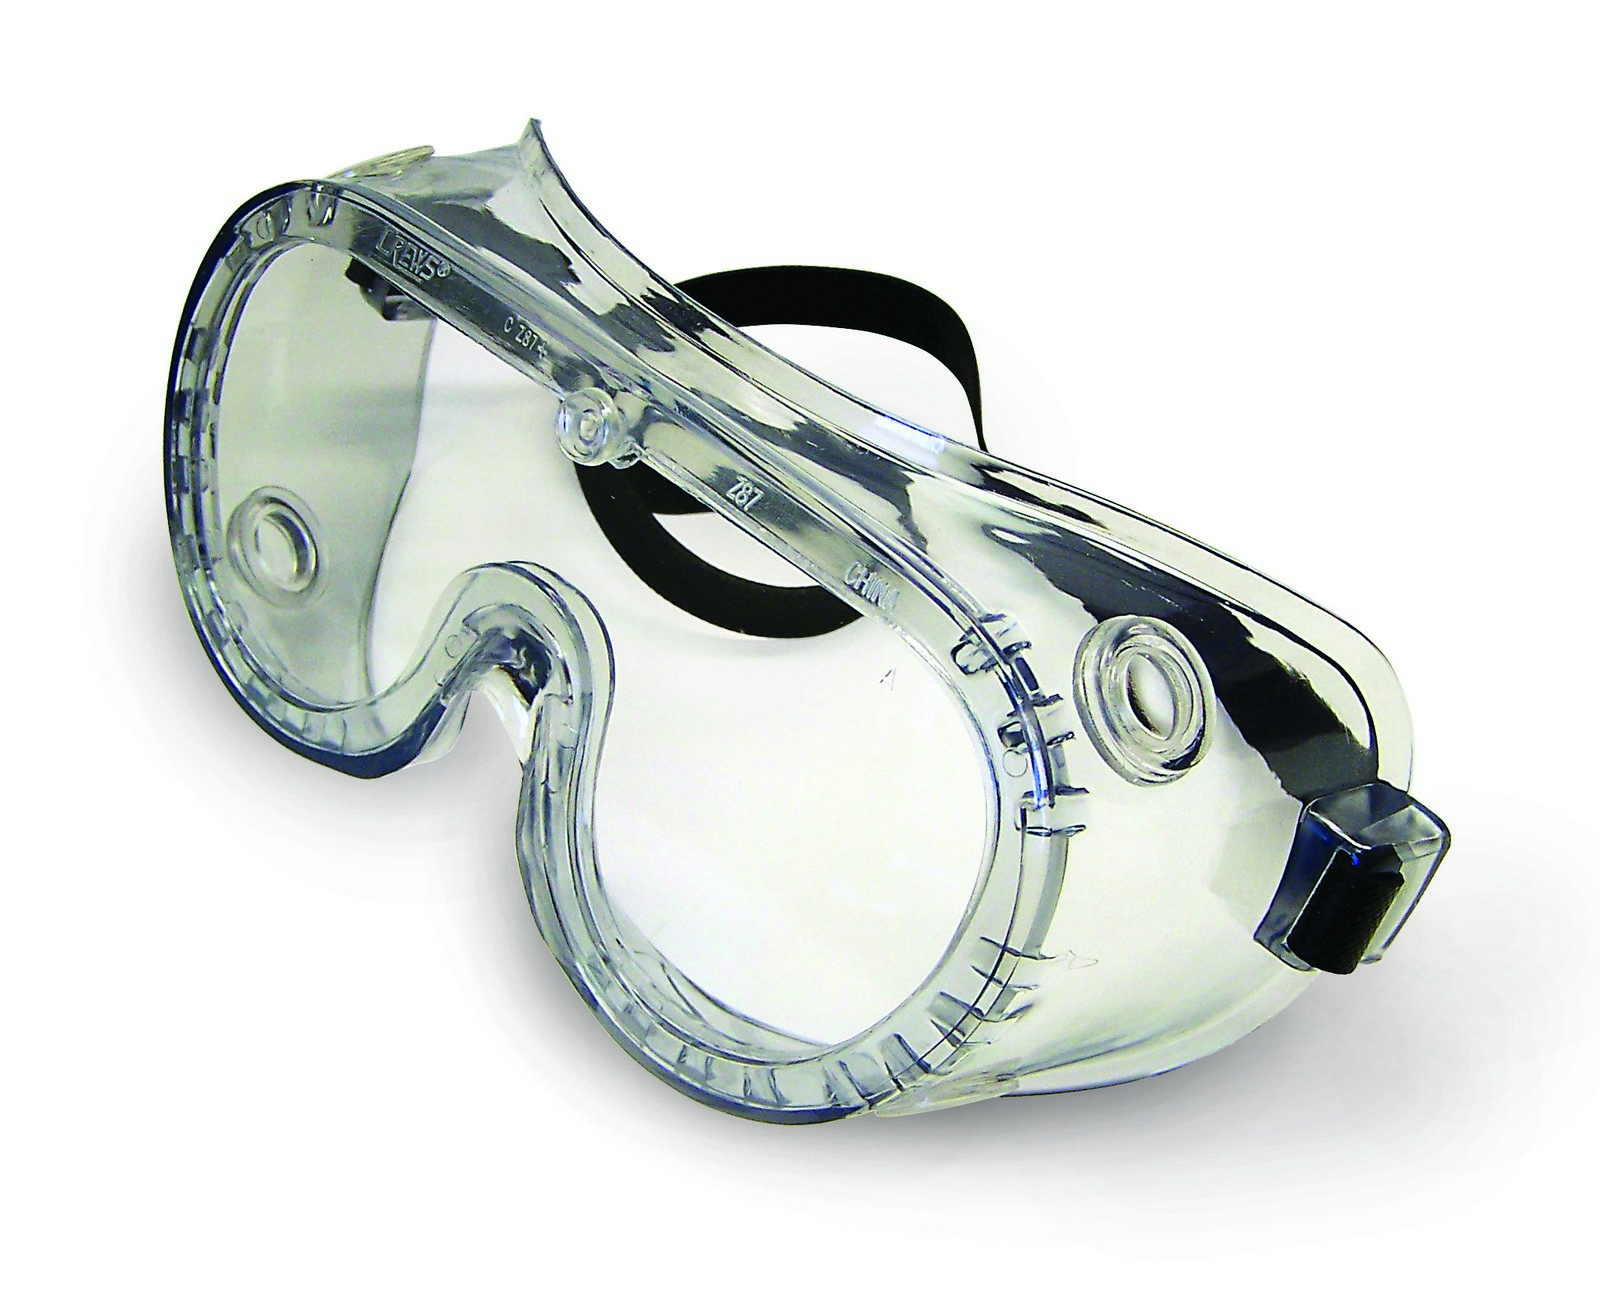 22 Series Goggles